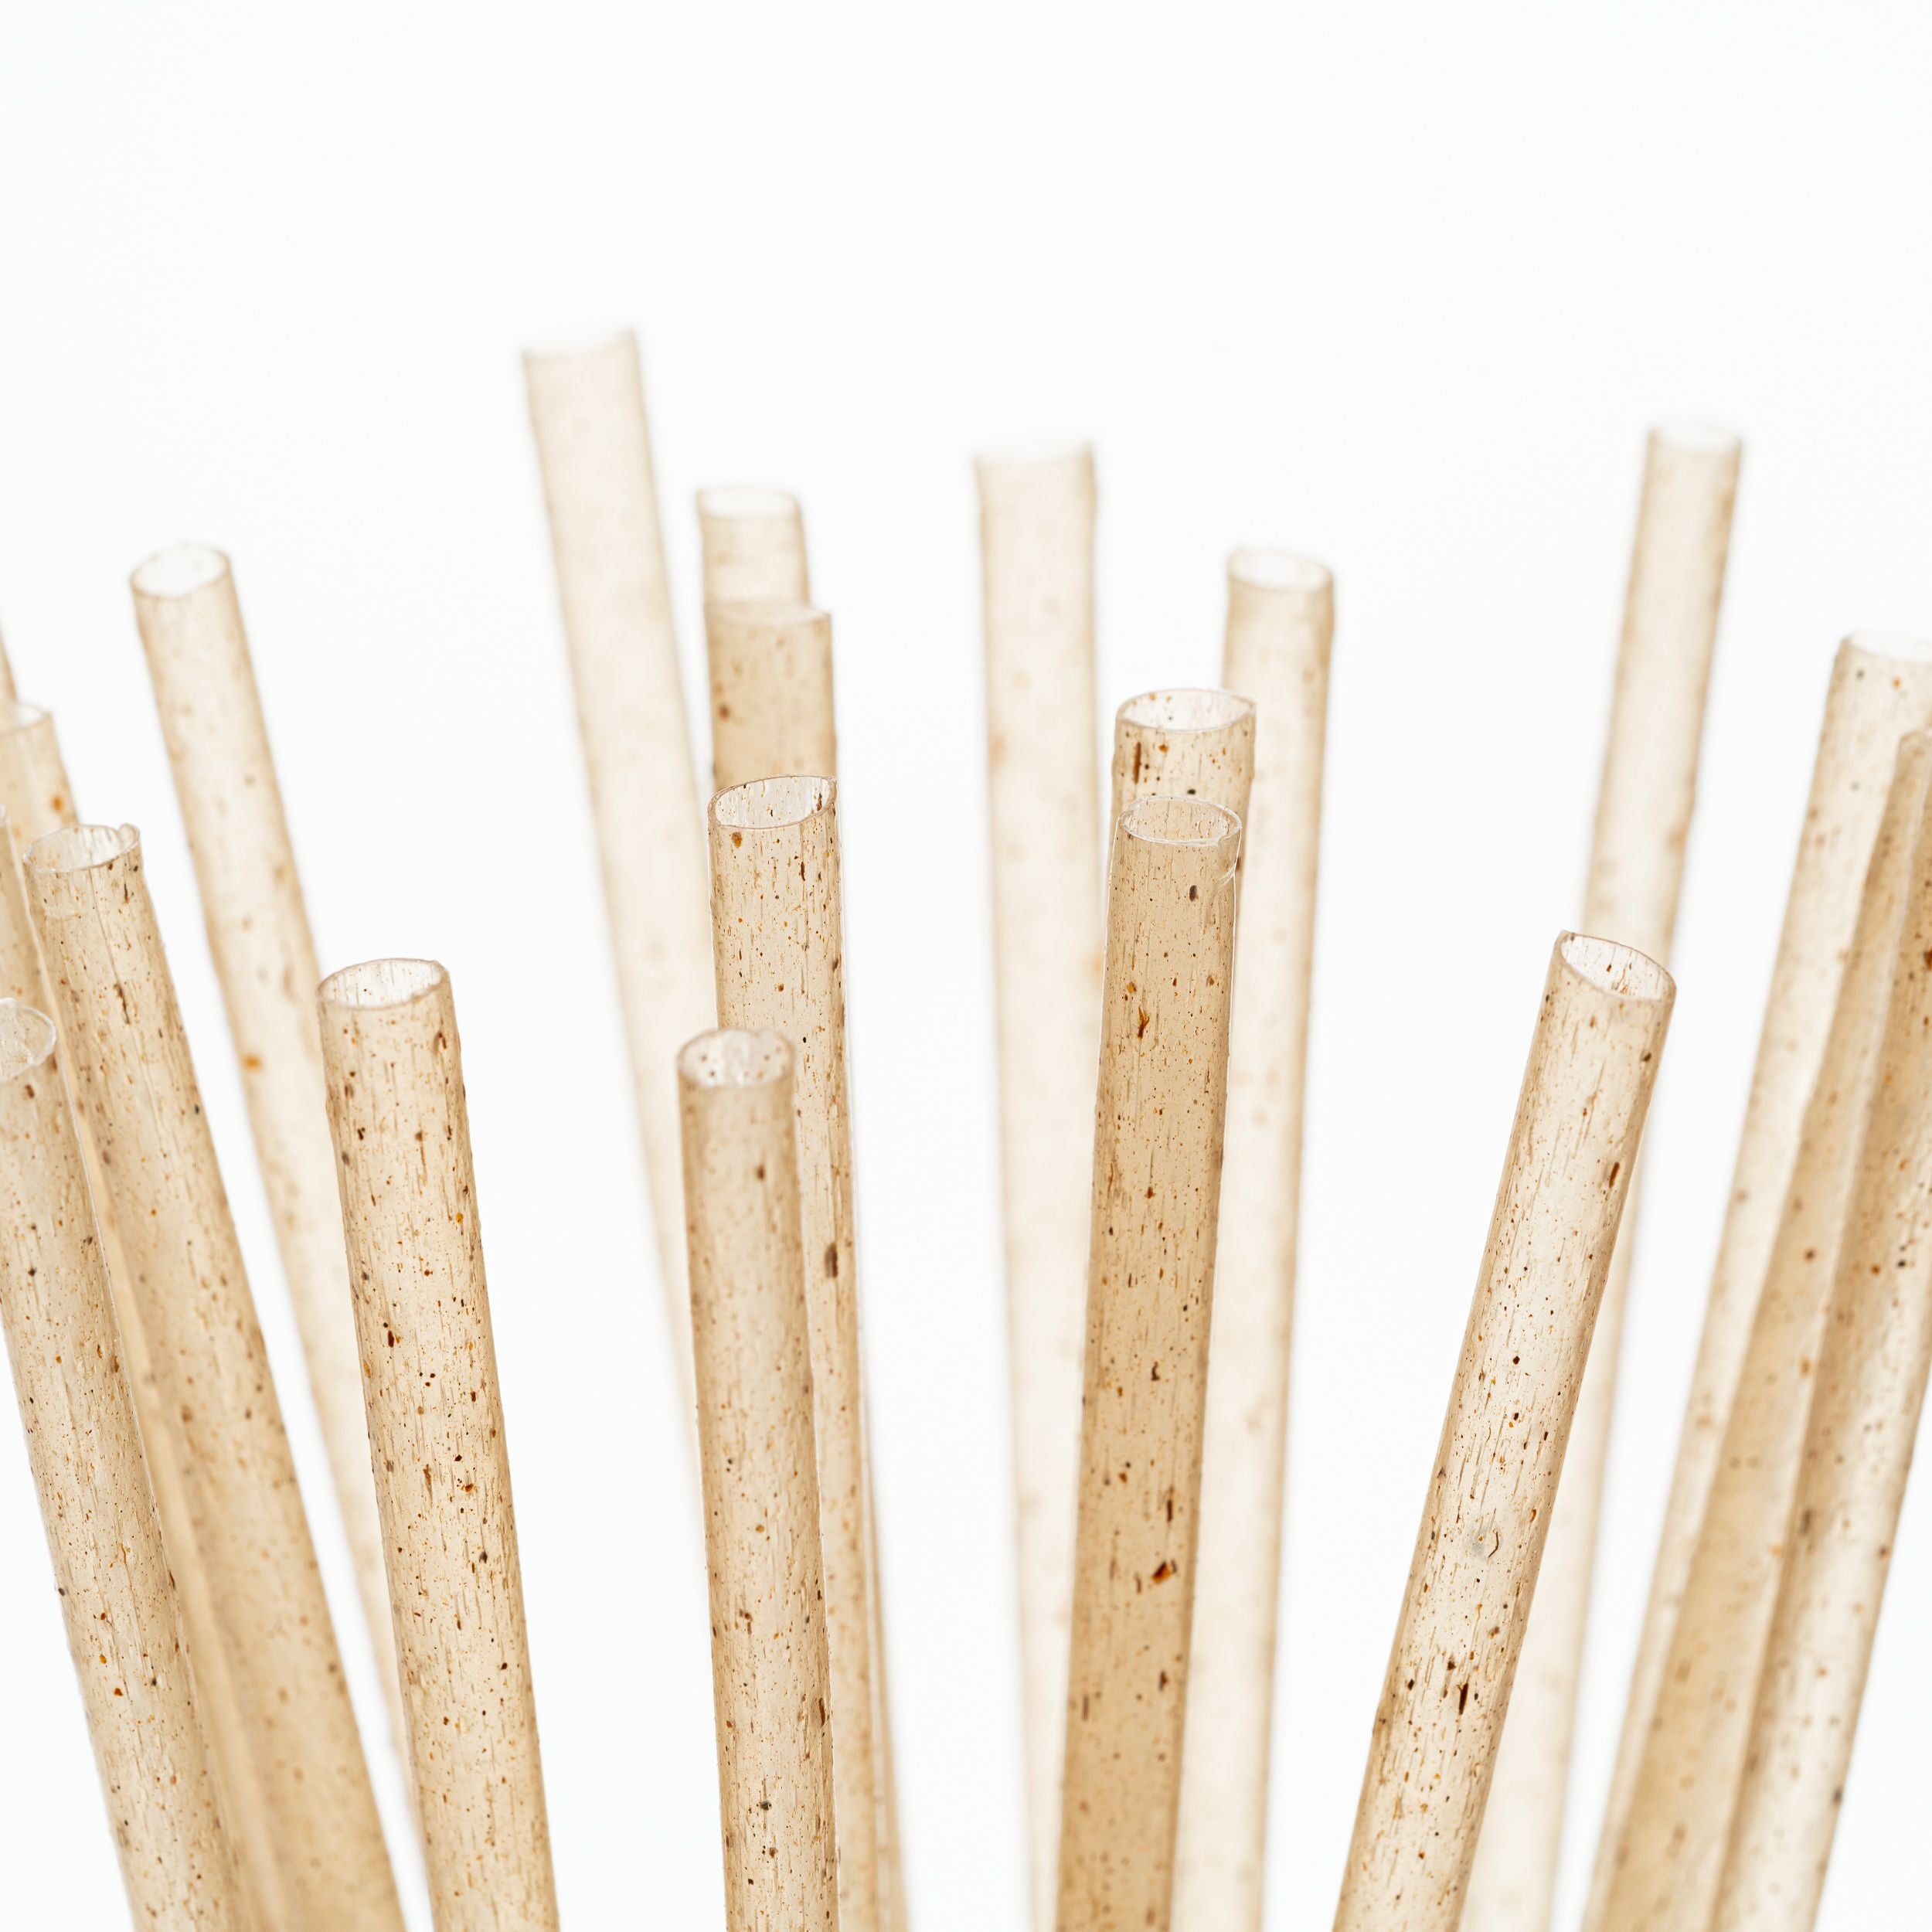 Standard 8.25 in - Natural Agave - Drinking Straw